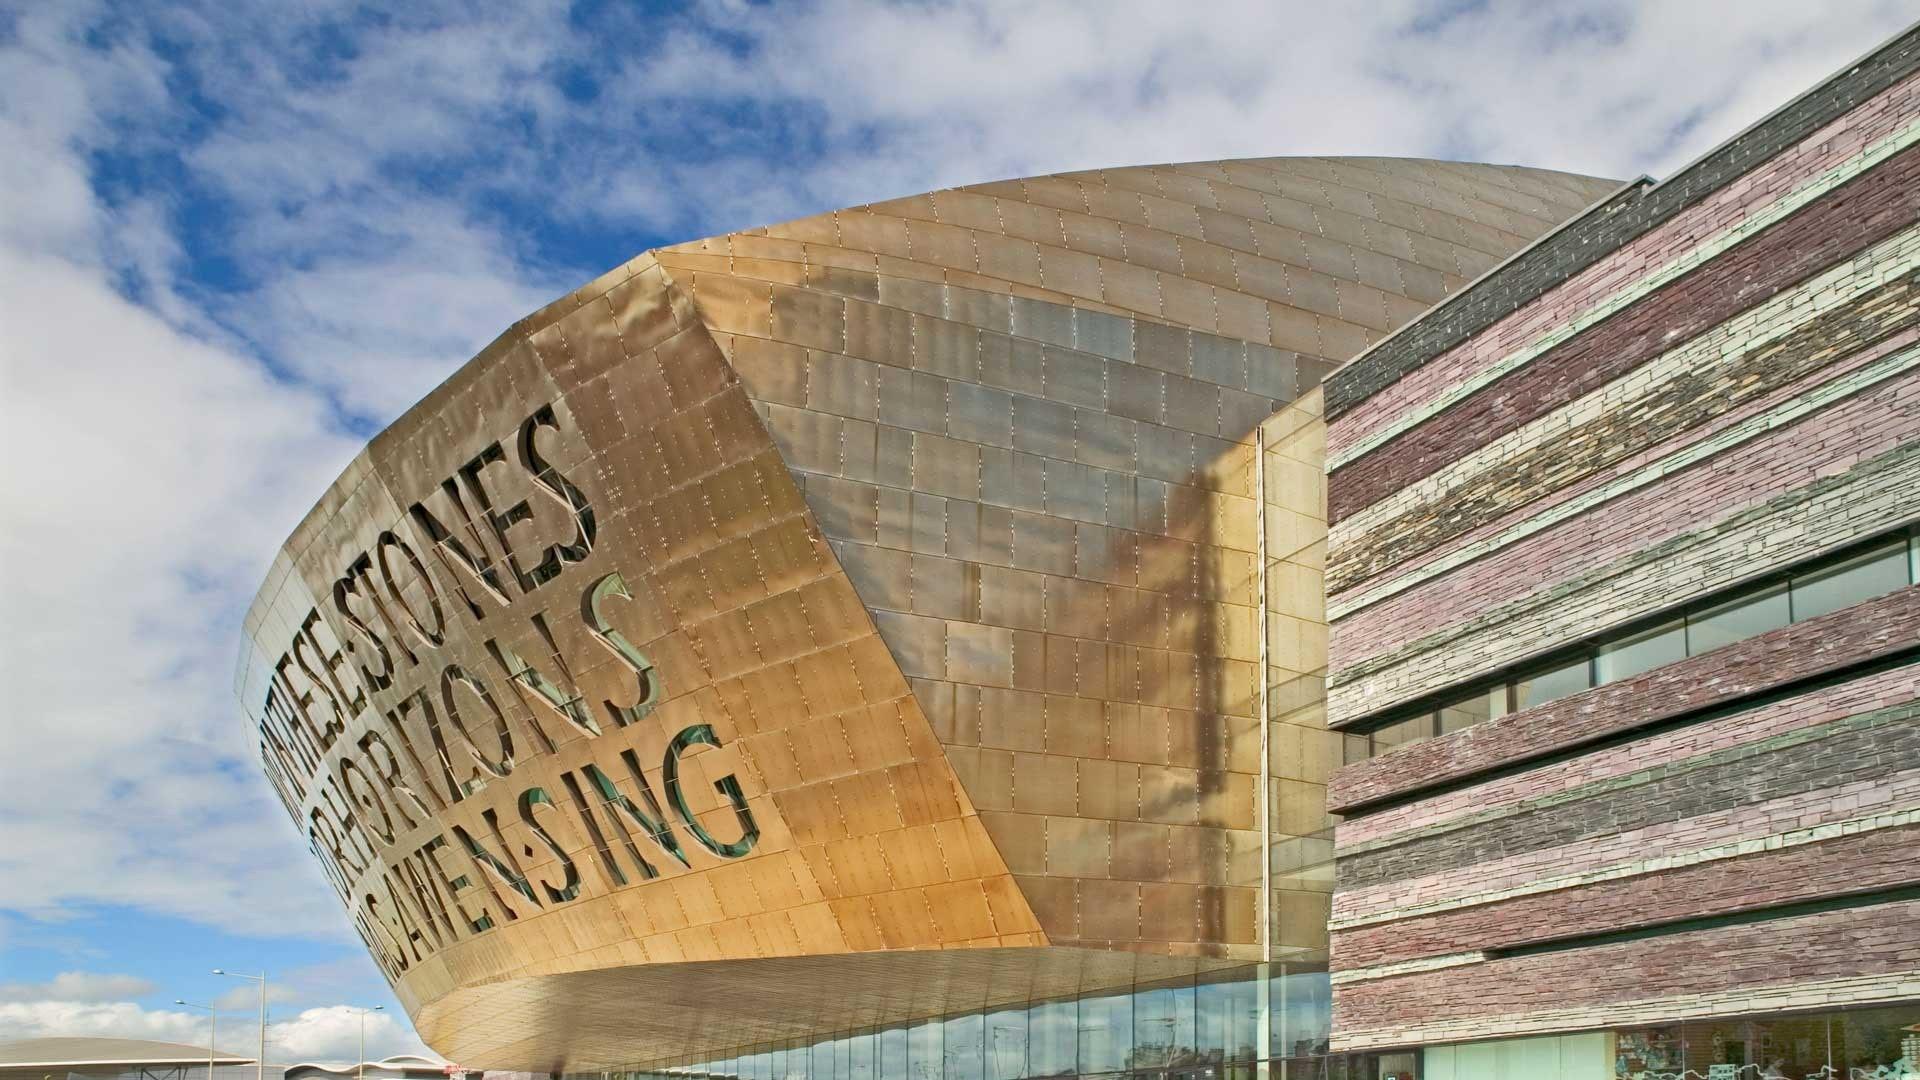 Cardiff Travel Guide & Advice